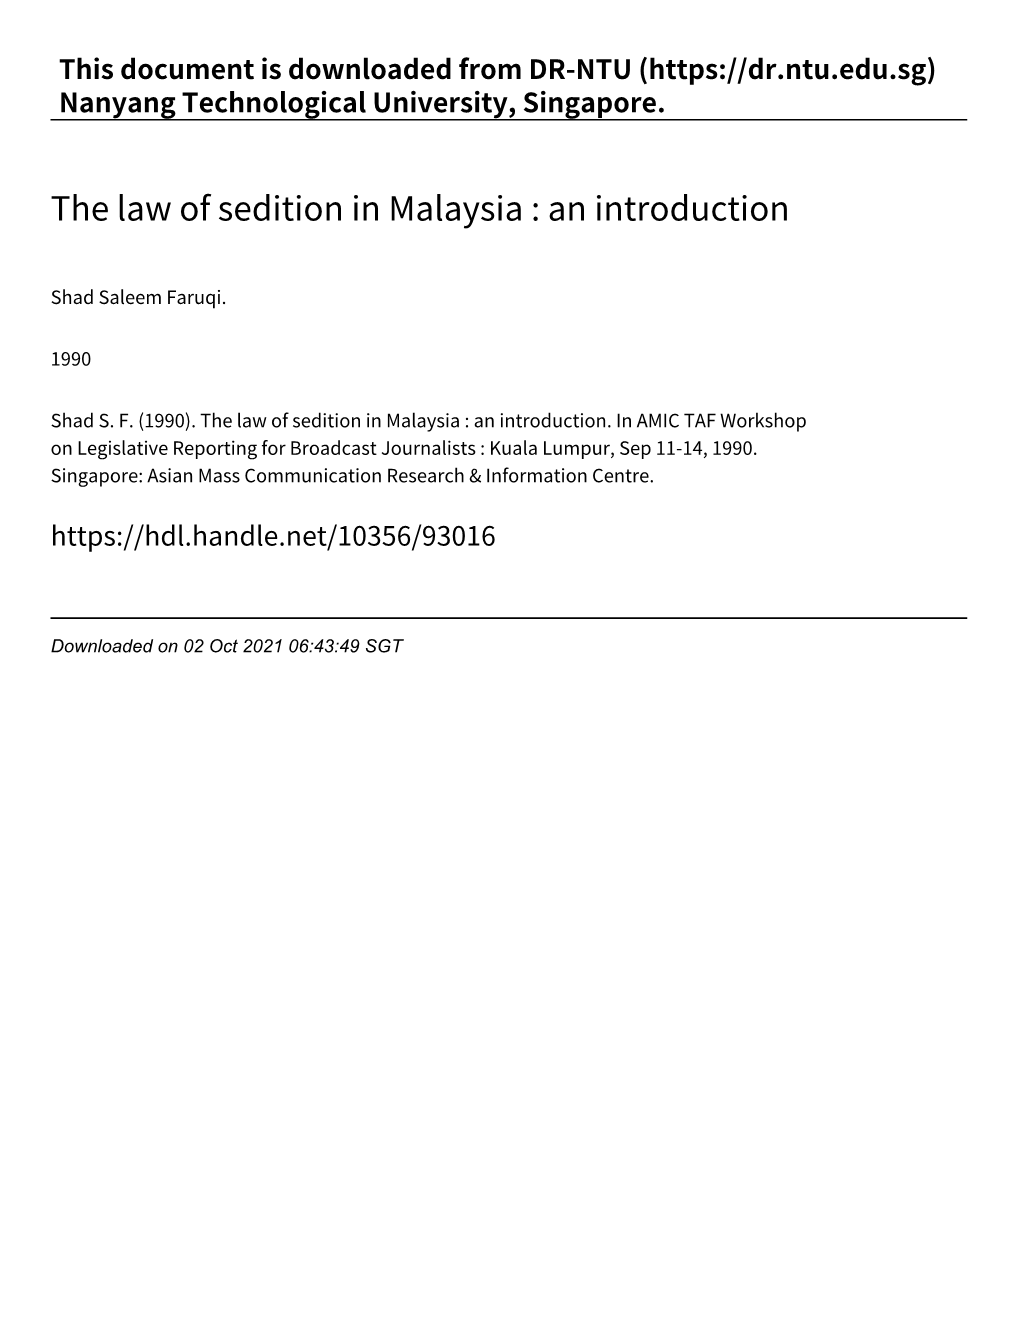 The Law of Sedition in Malaysia : an Introduction